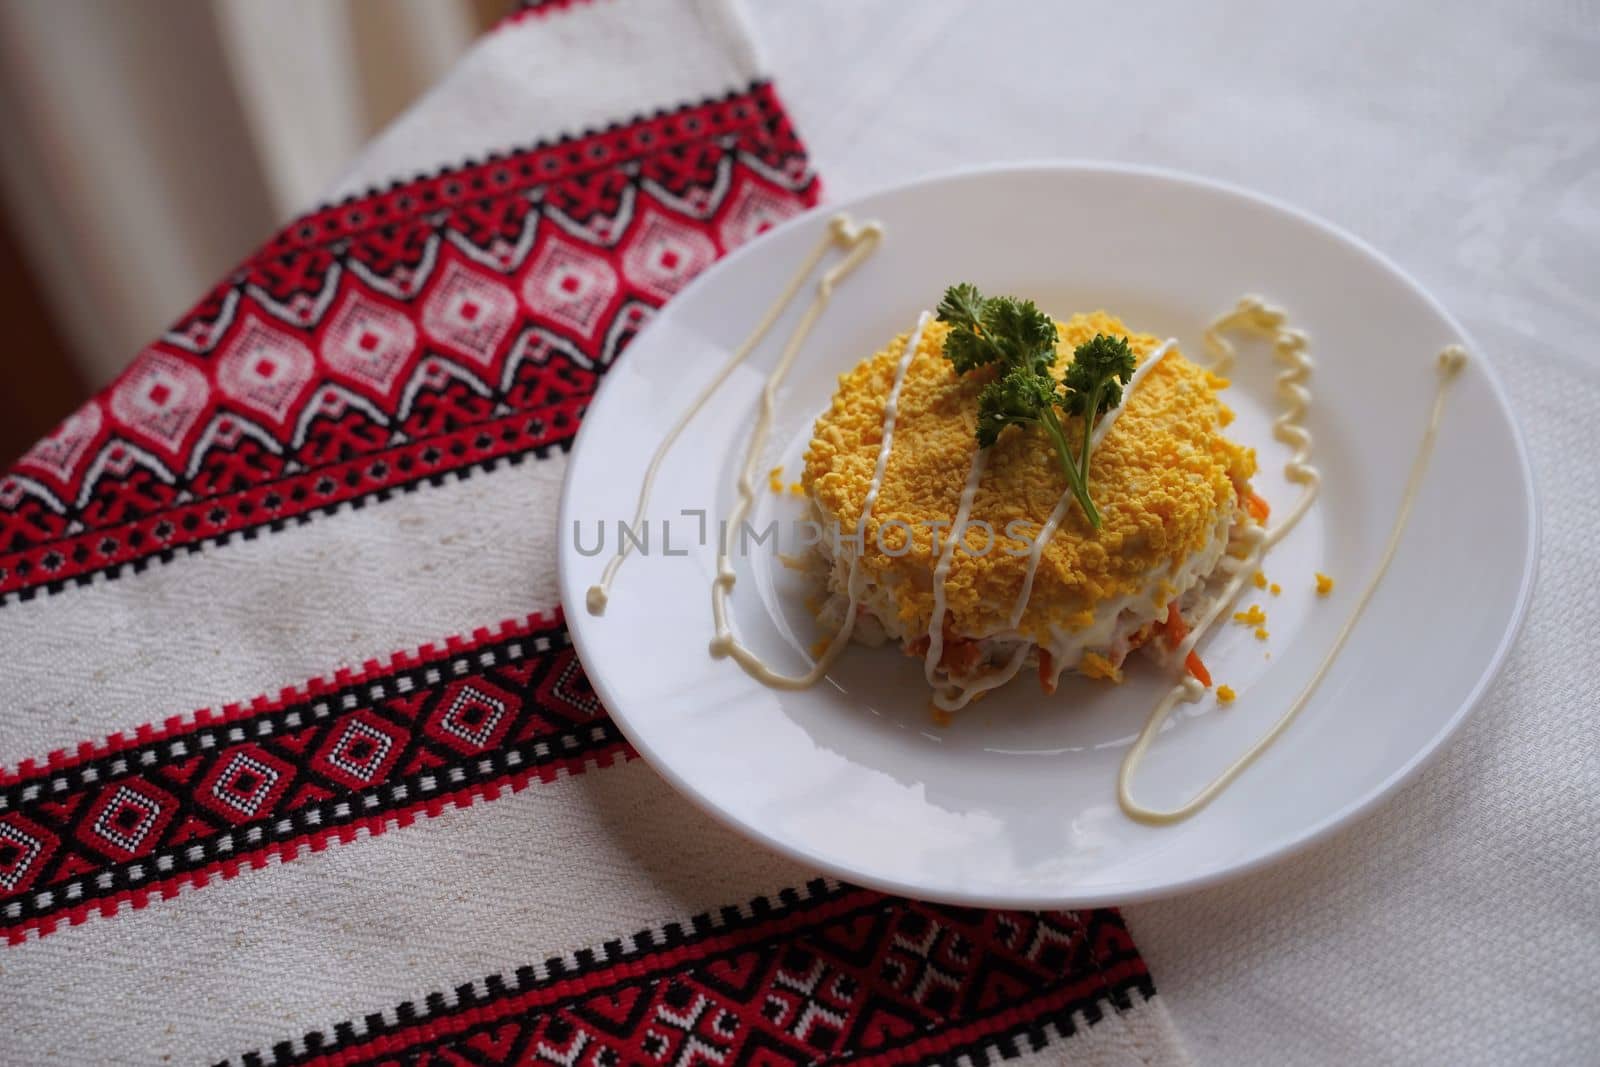 Traditional Ukrainian food on the table with embroidered tablecloth.